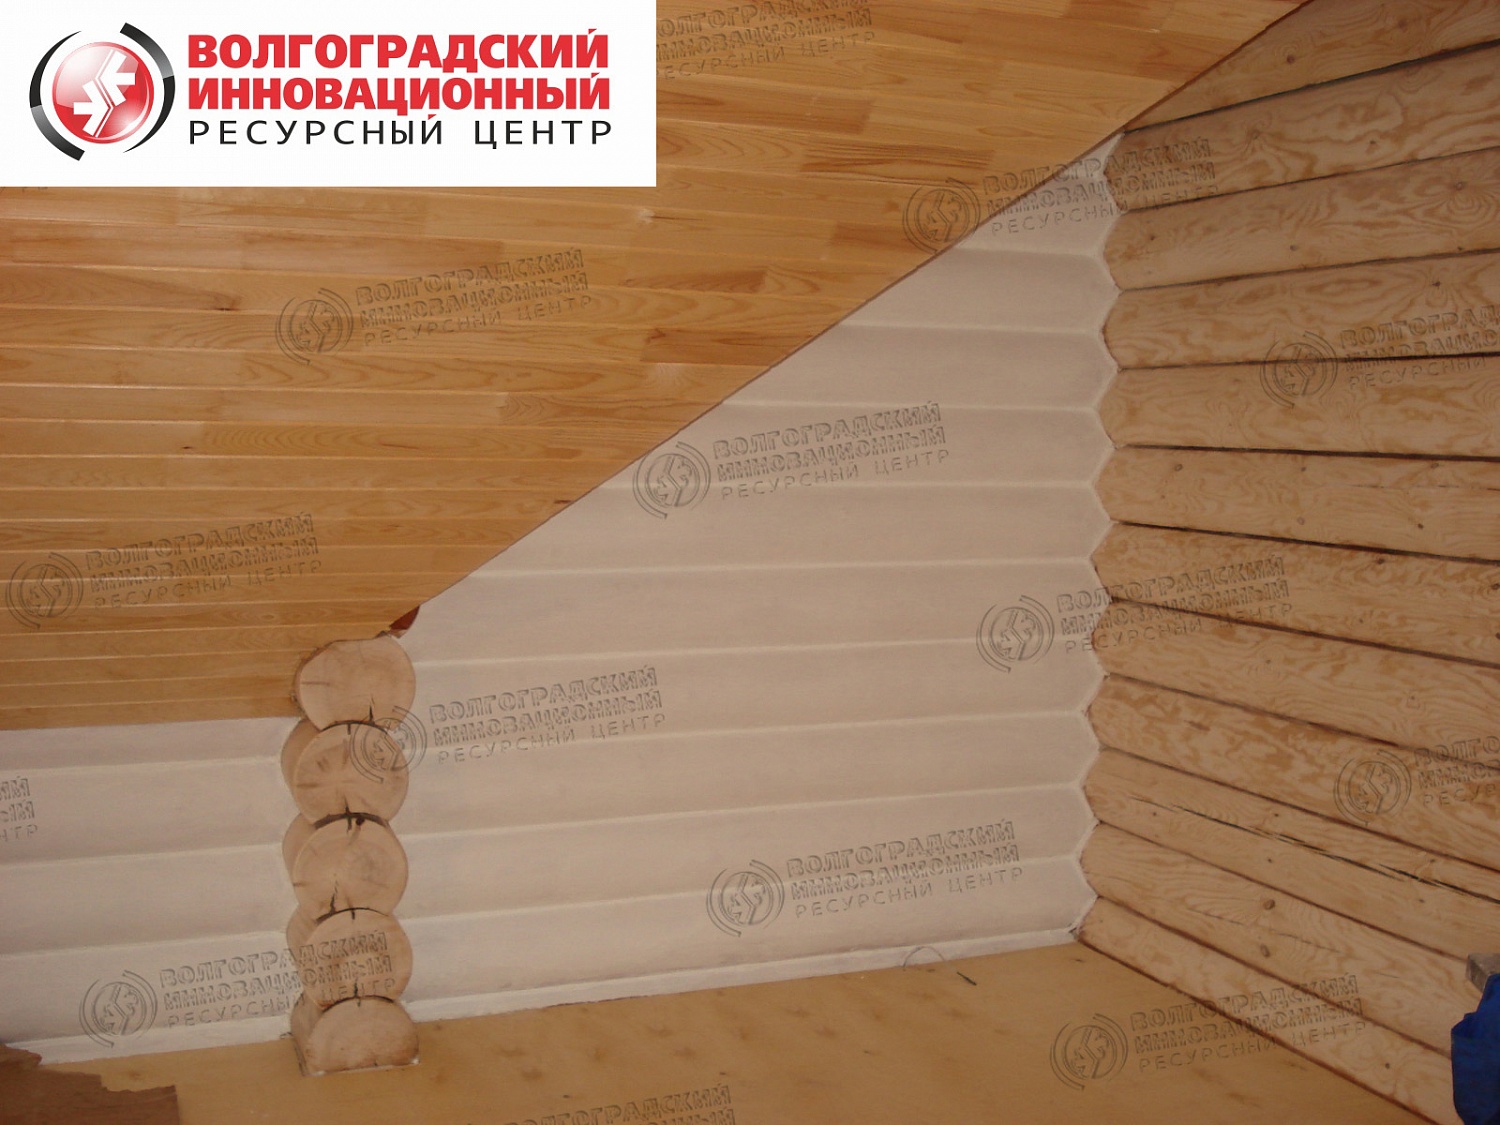 Competence in thermal insulation of wooden structures, residential wooden log and block log cabins